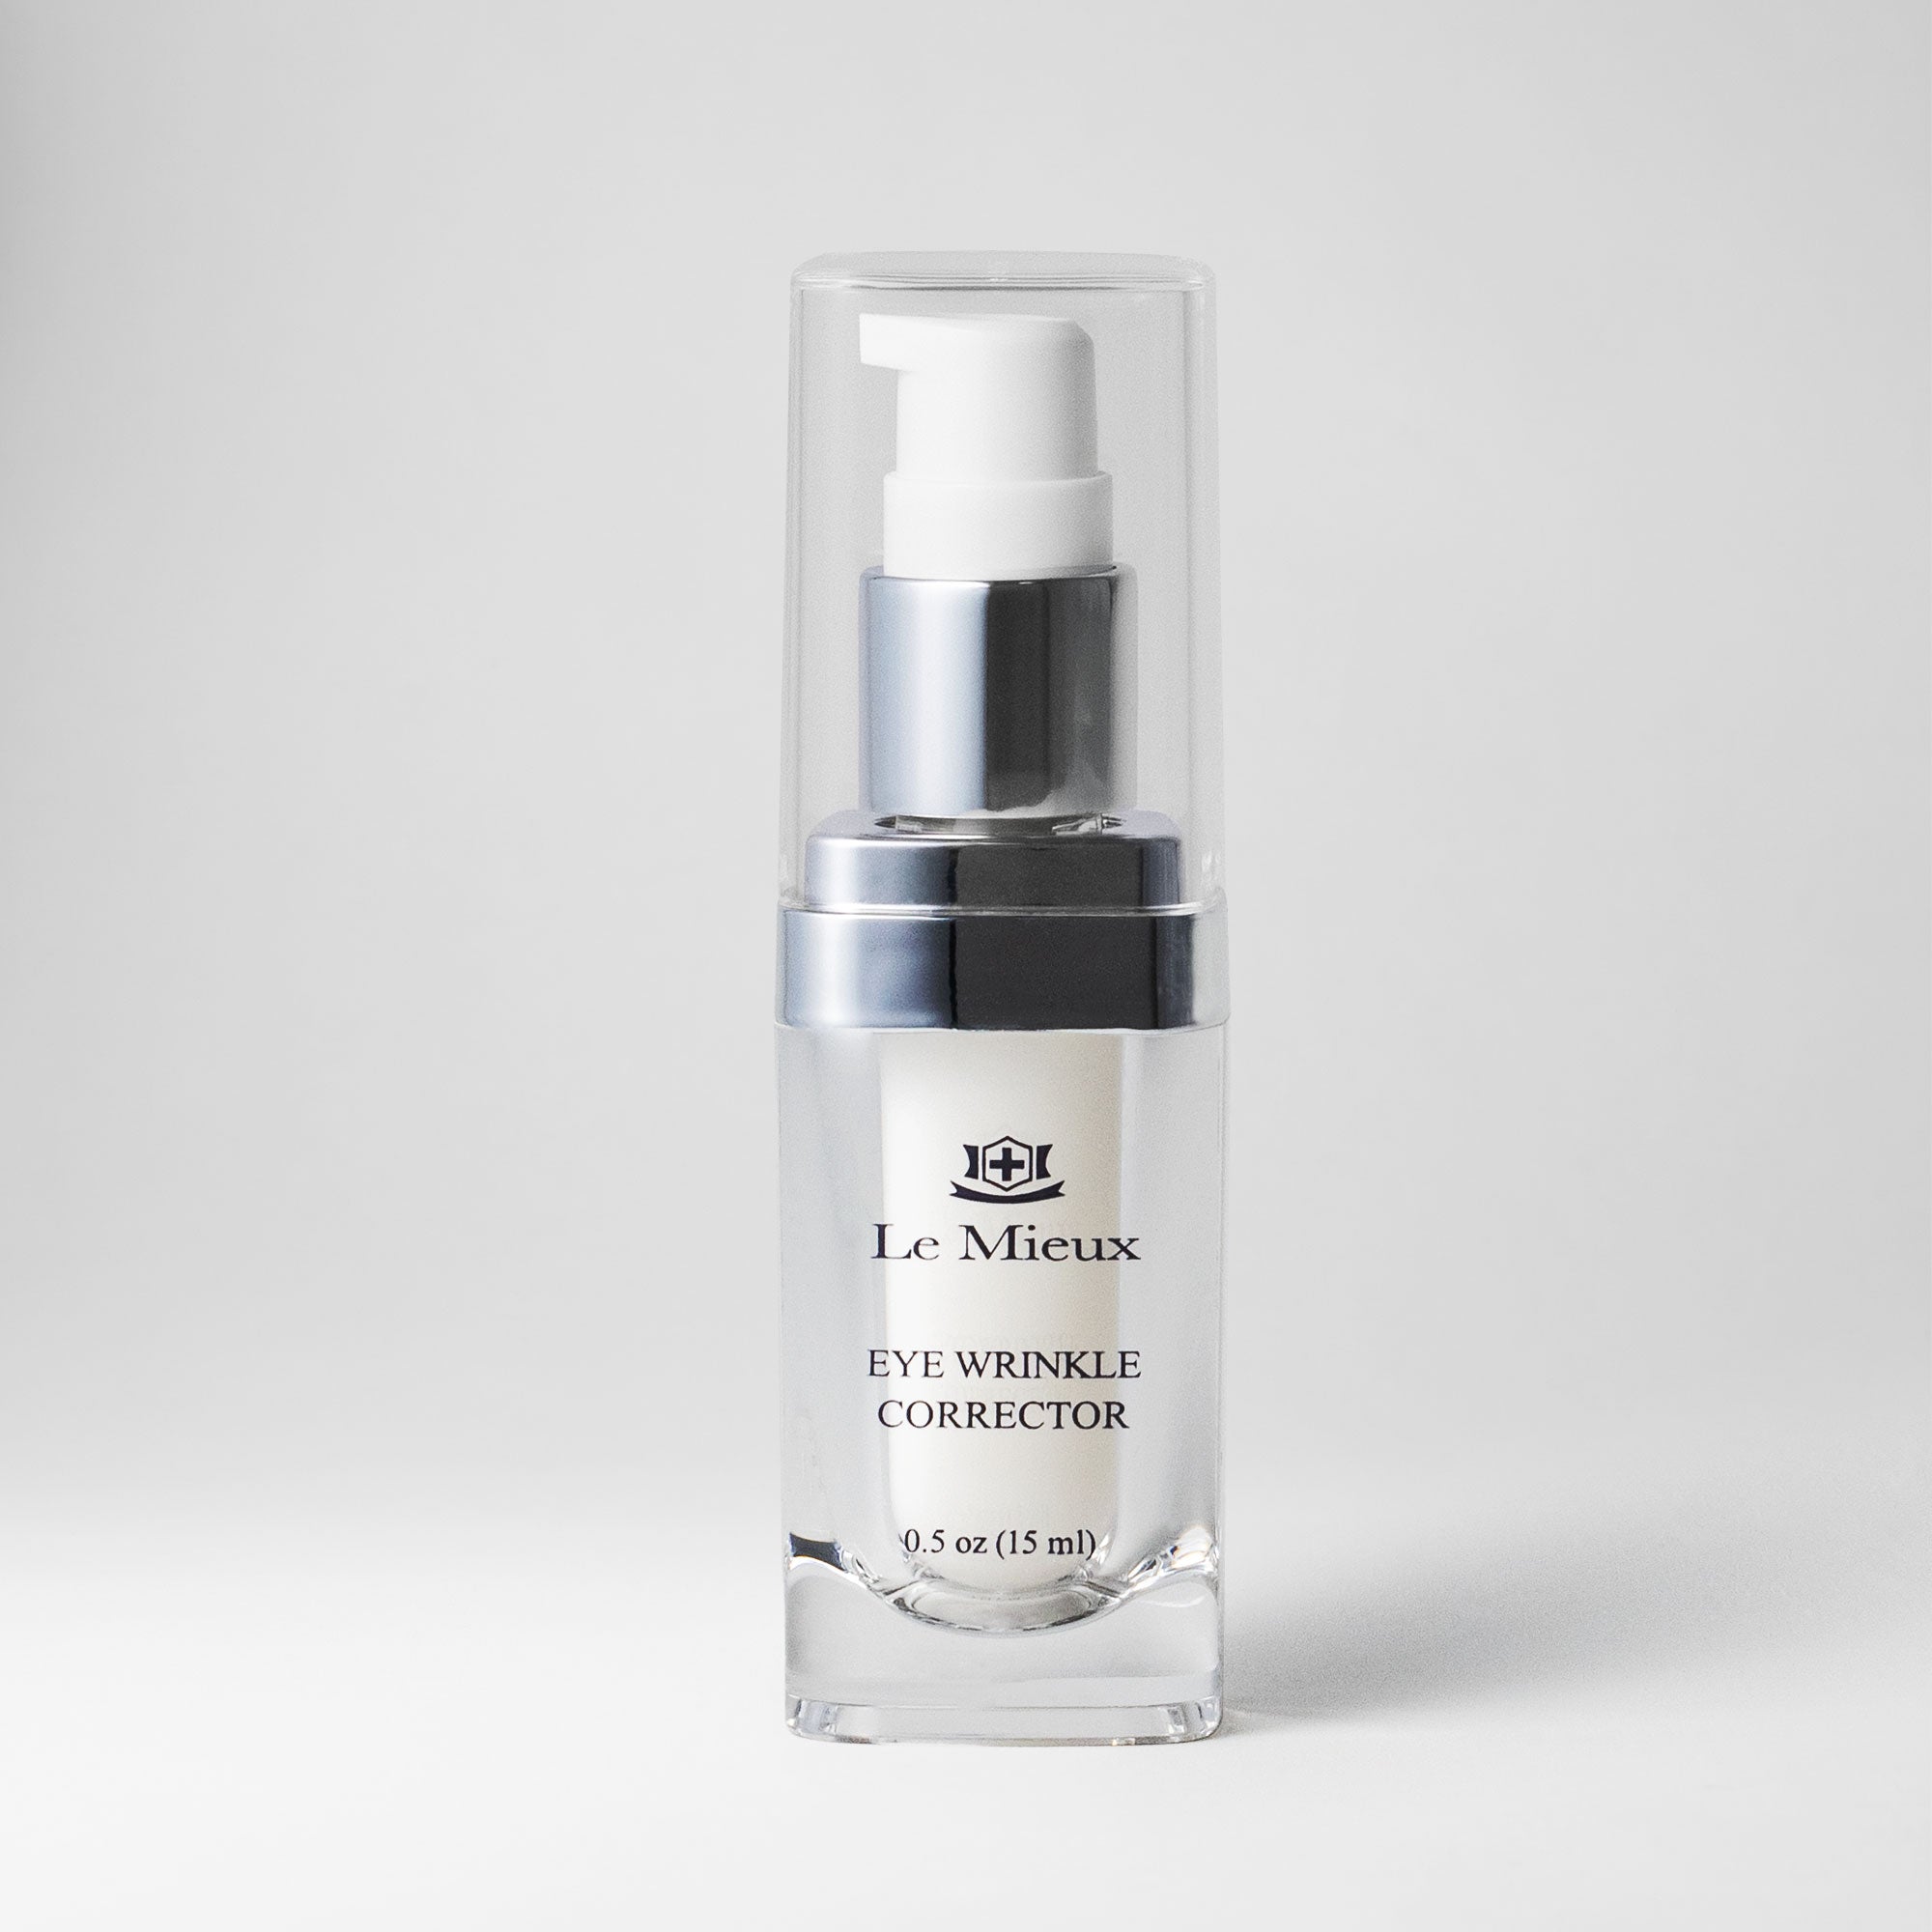  EYE WRINKLE CORRECTOR from Le Mieux Skincare - 1